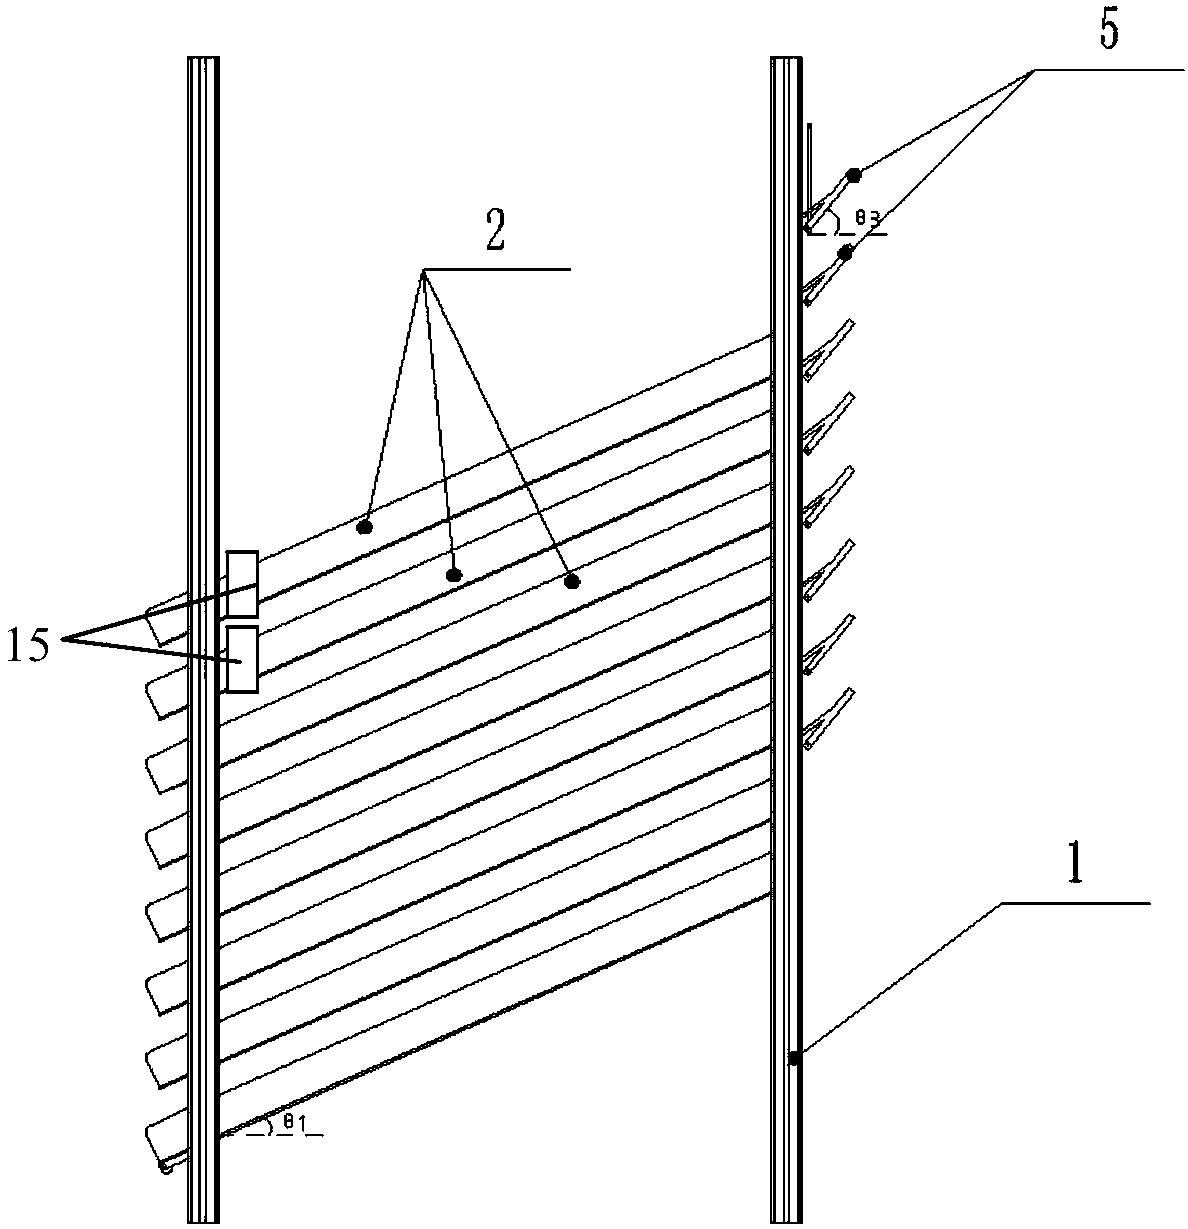 Discharge structure